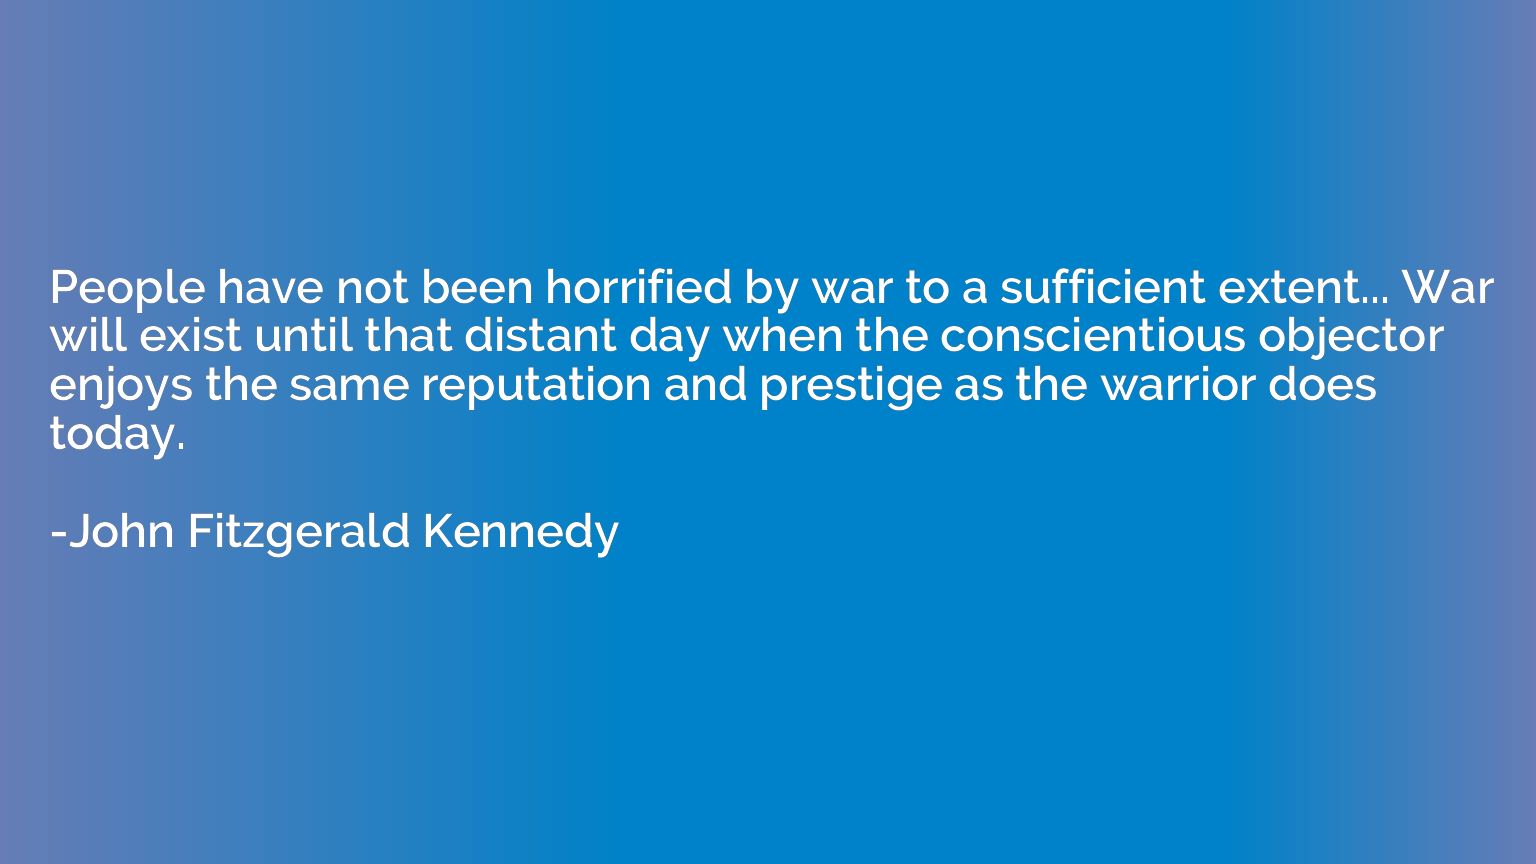 People have not been horrified by war to a sufficient extent